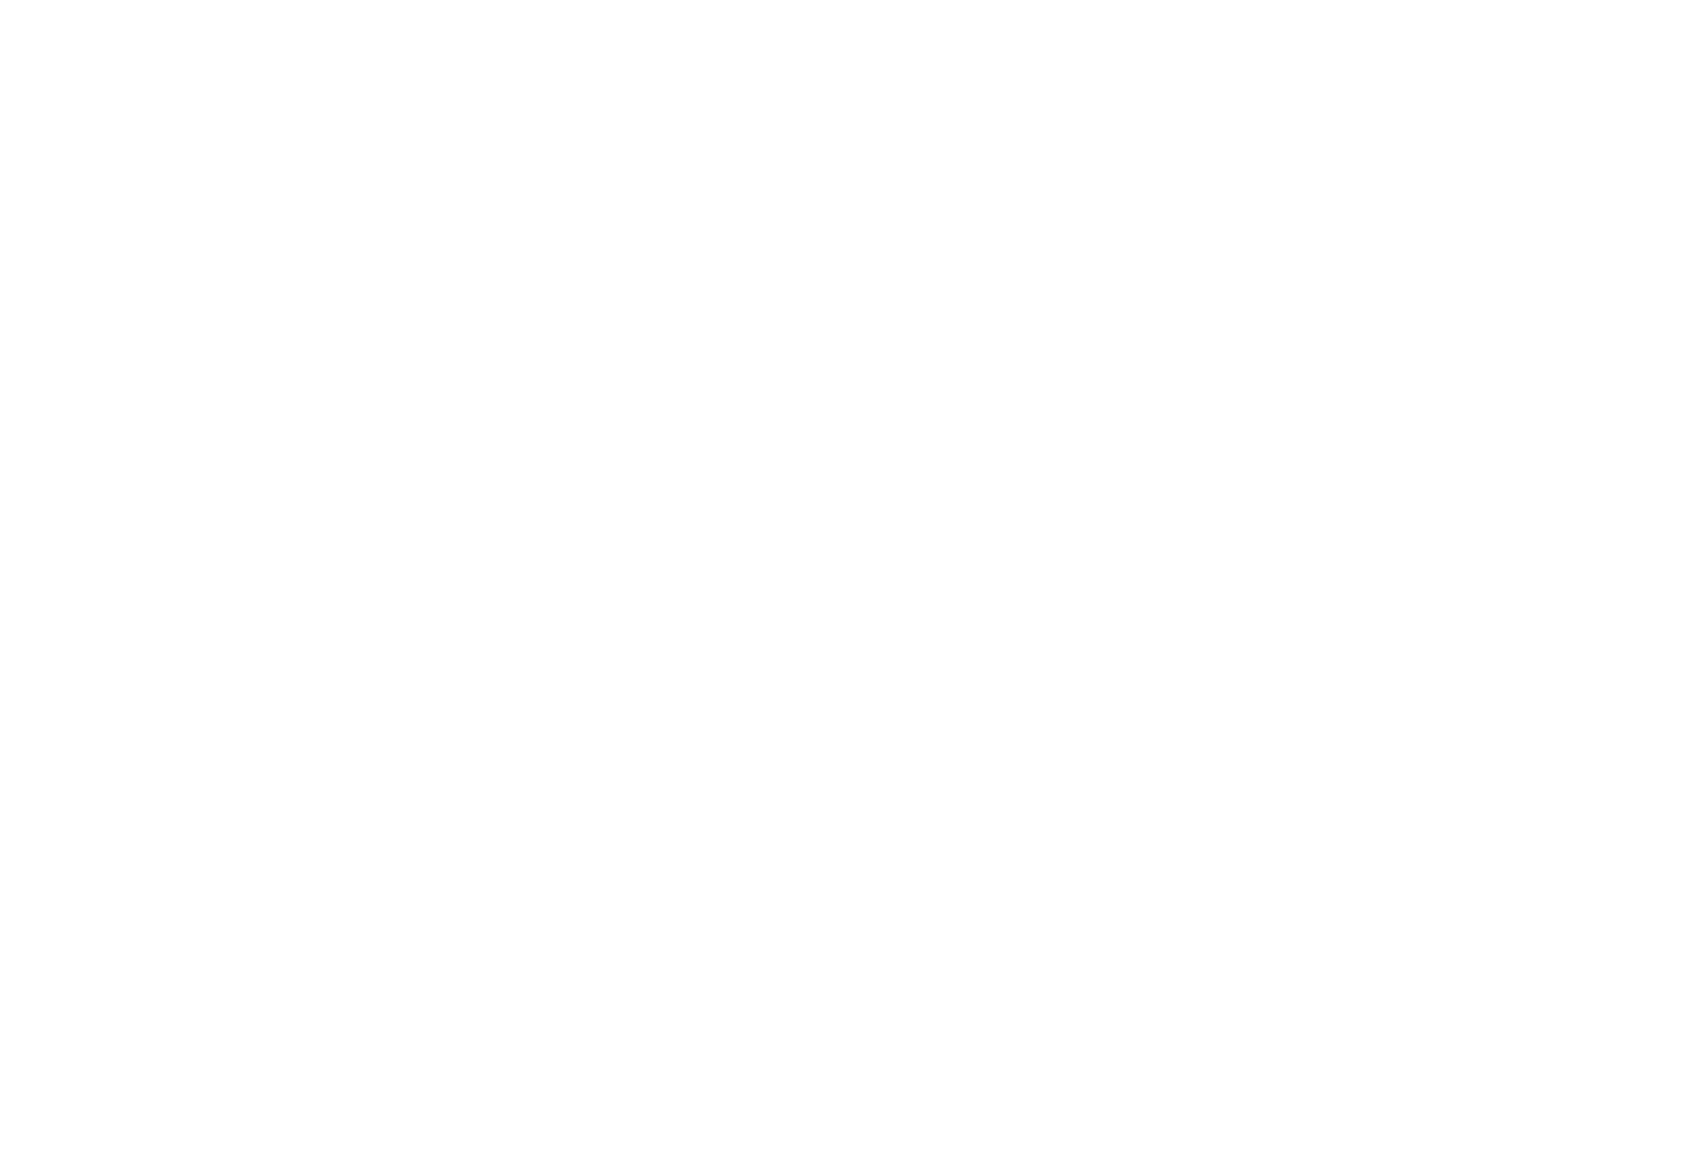 Logo of the National Forest Company